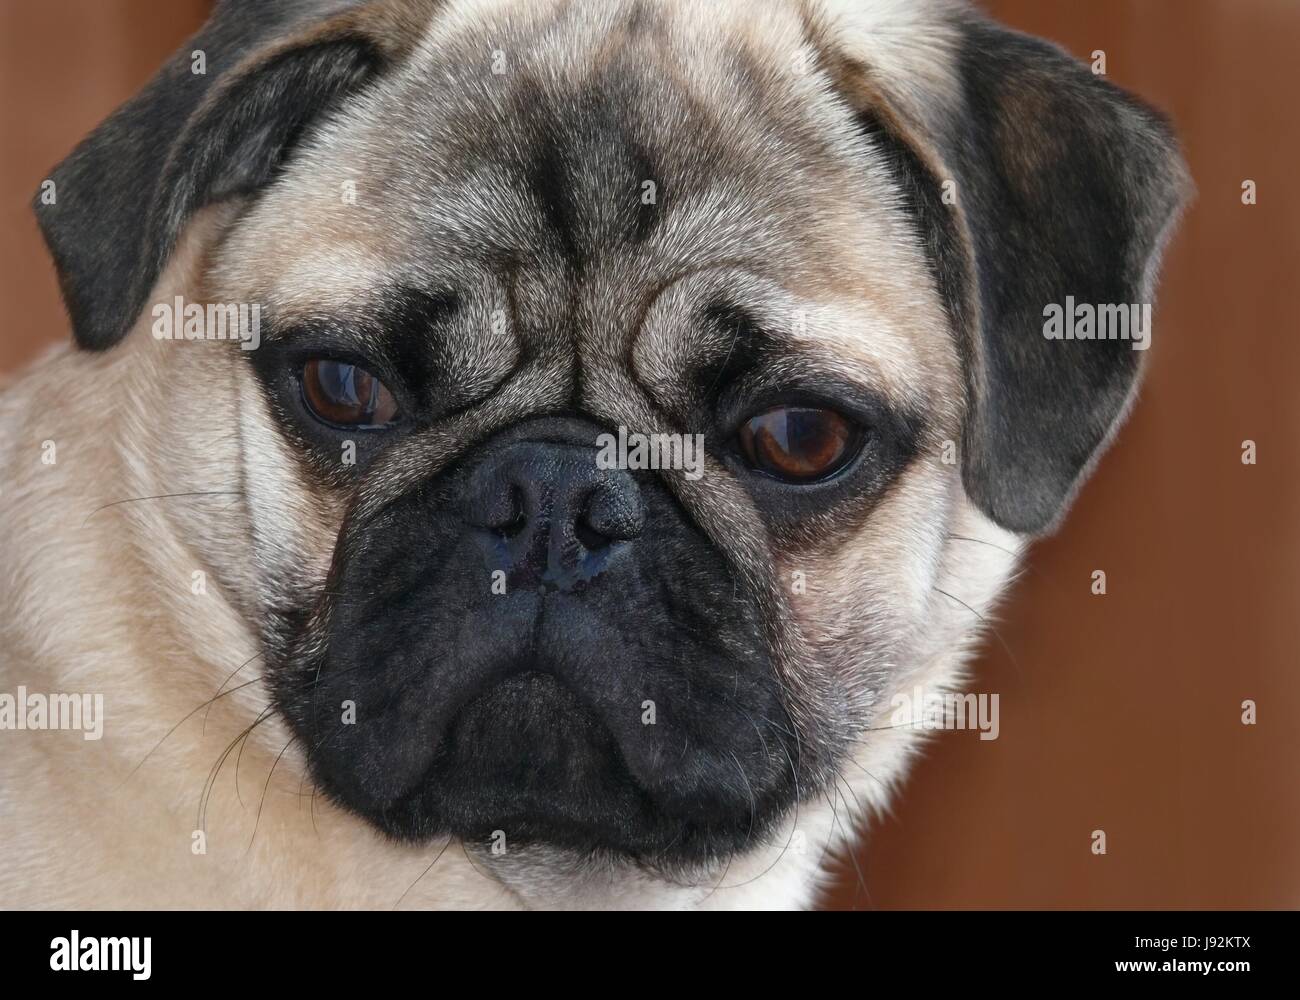 pug, animal, pet, animals, pets, quadruped, dog, dogs, beige, frown, pug, Stock Photo